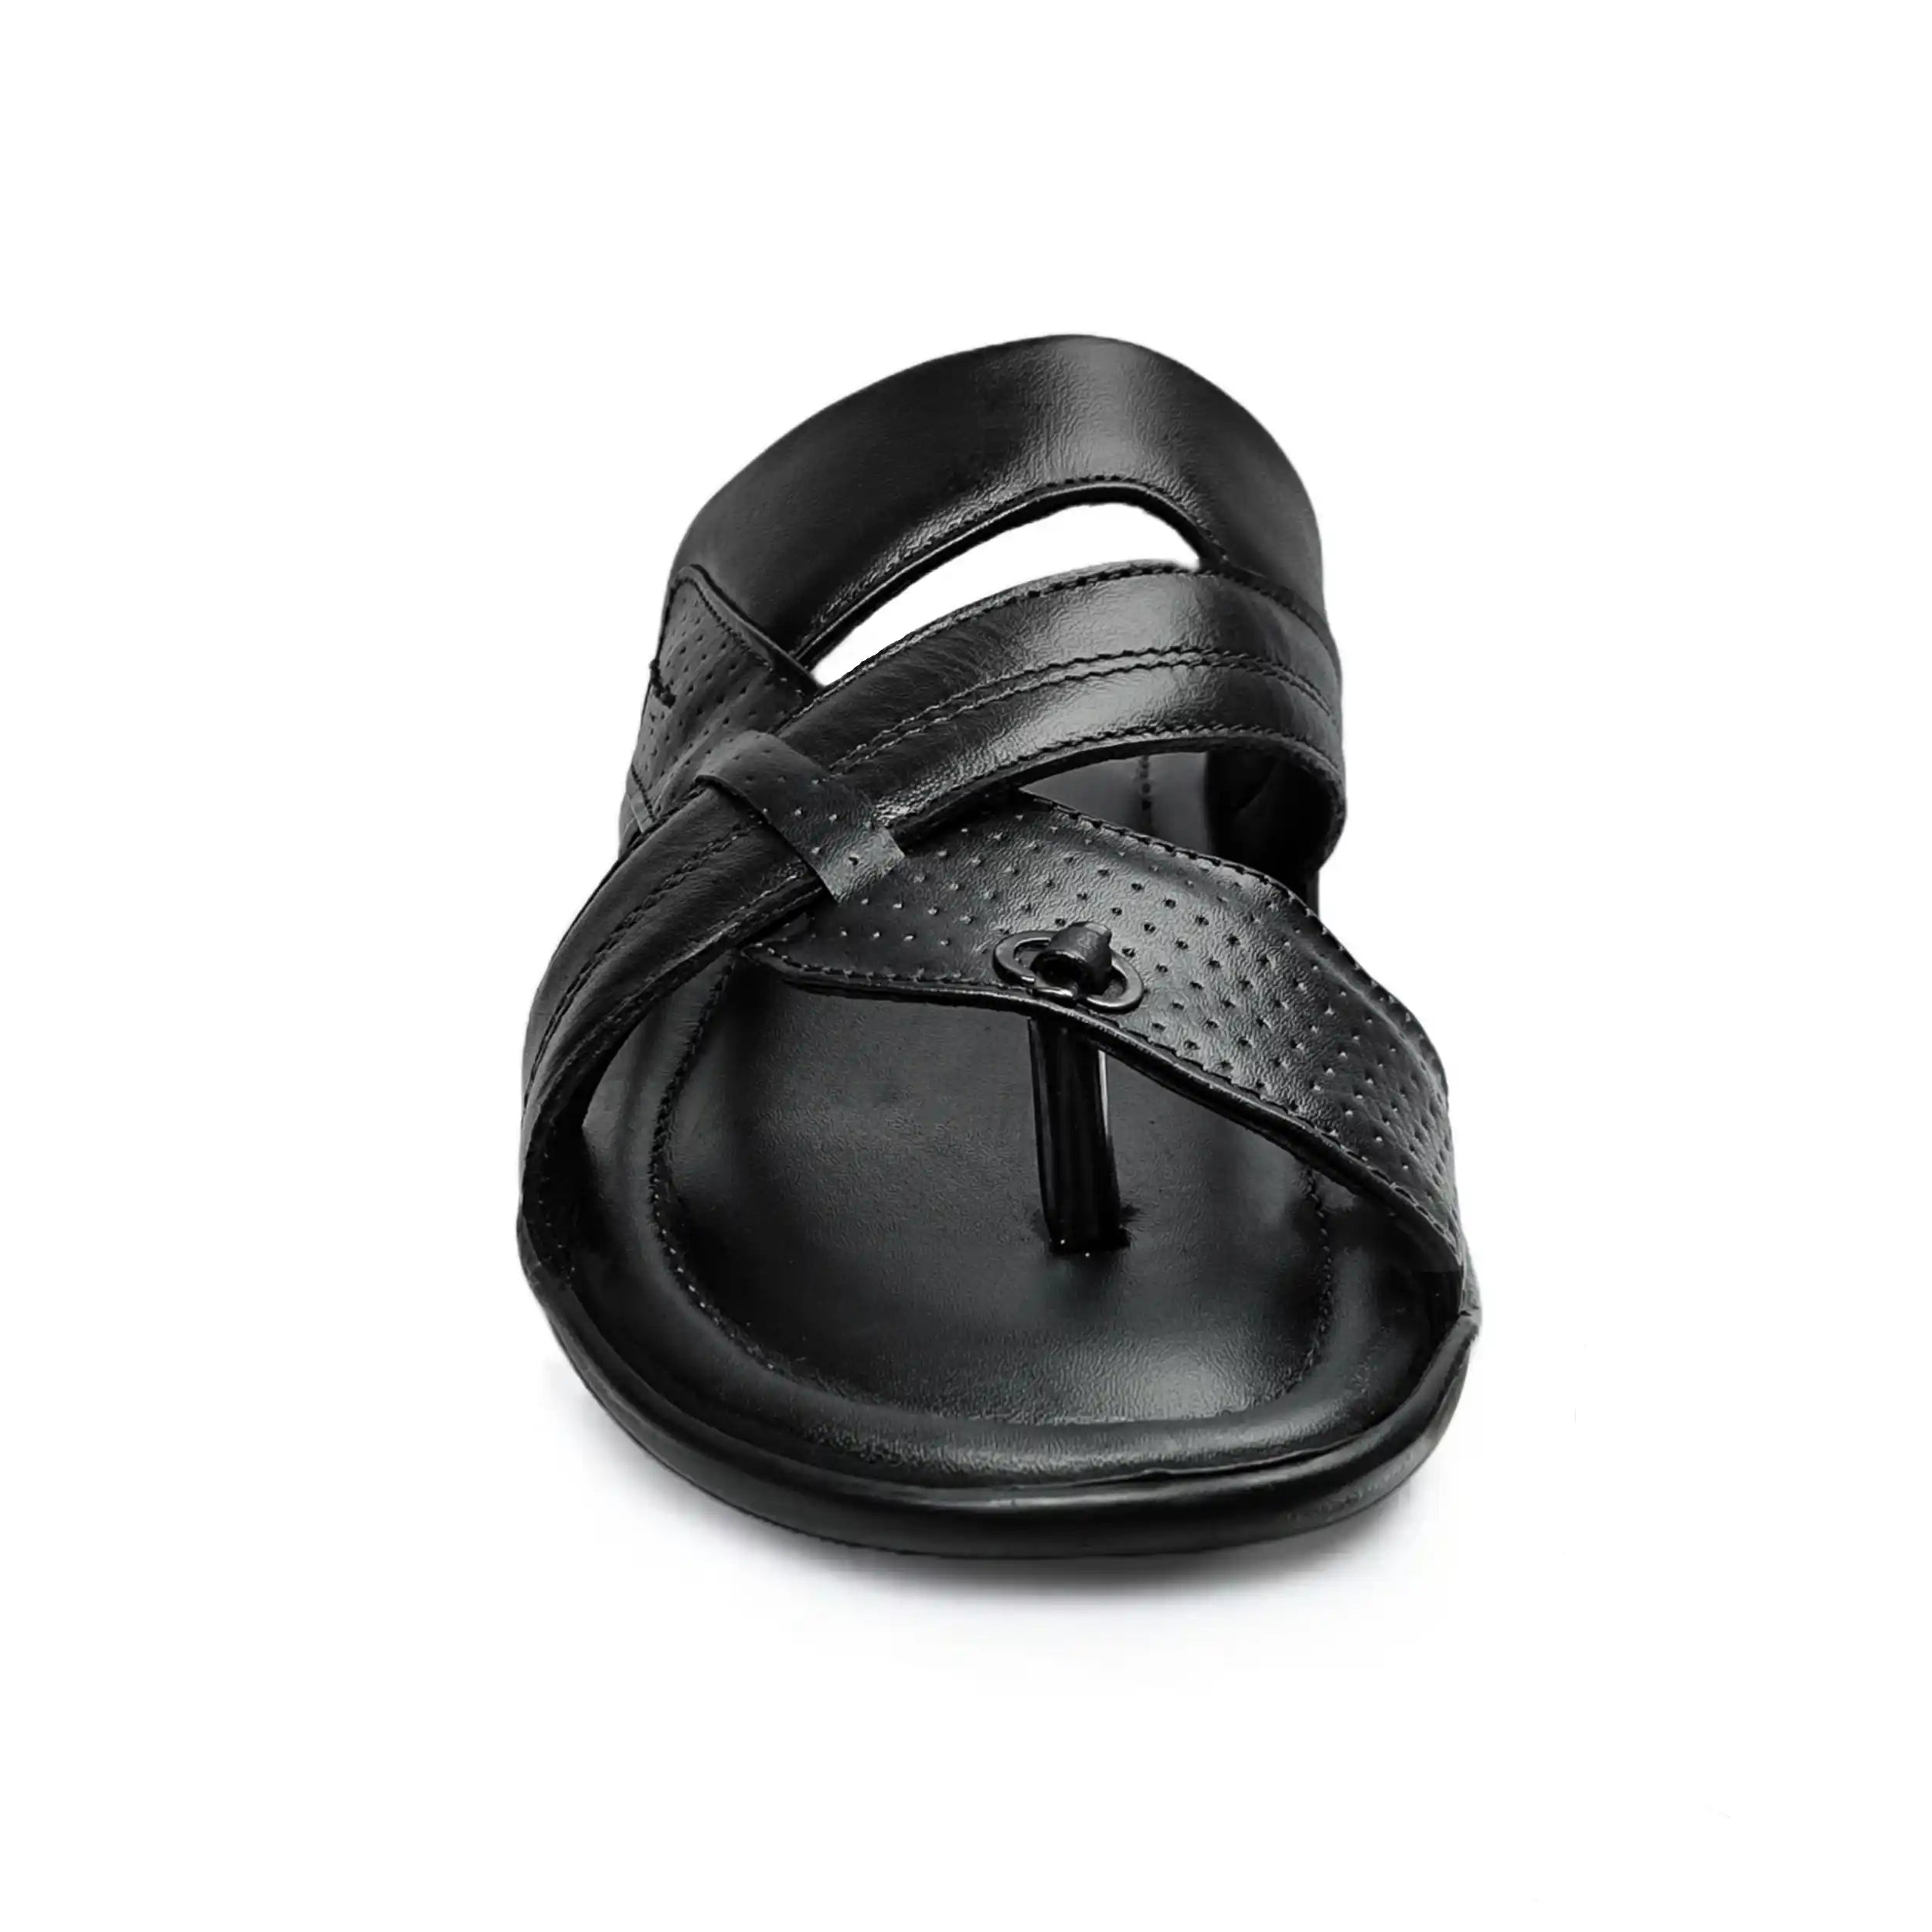 mens slipper - Formal Shoes Prices and Deals - Men's Shoes Oct 2023 |  Shopee Singapore